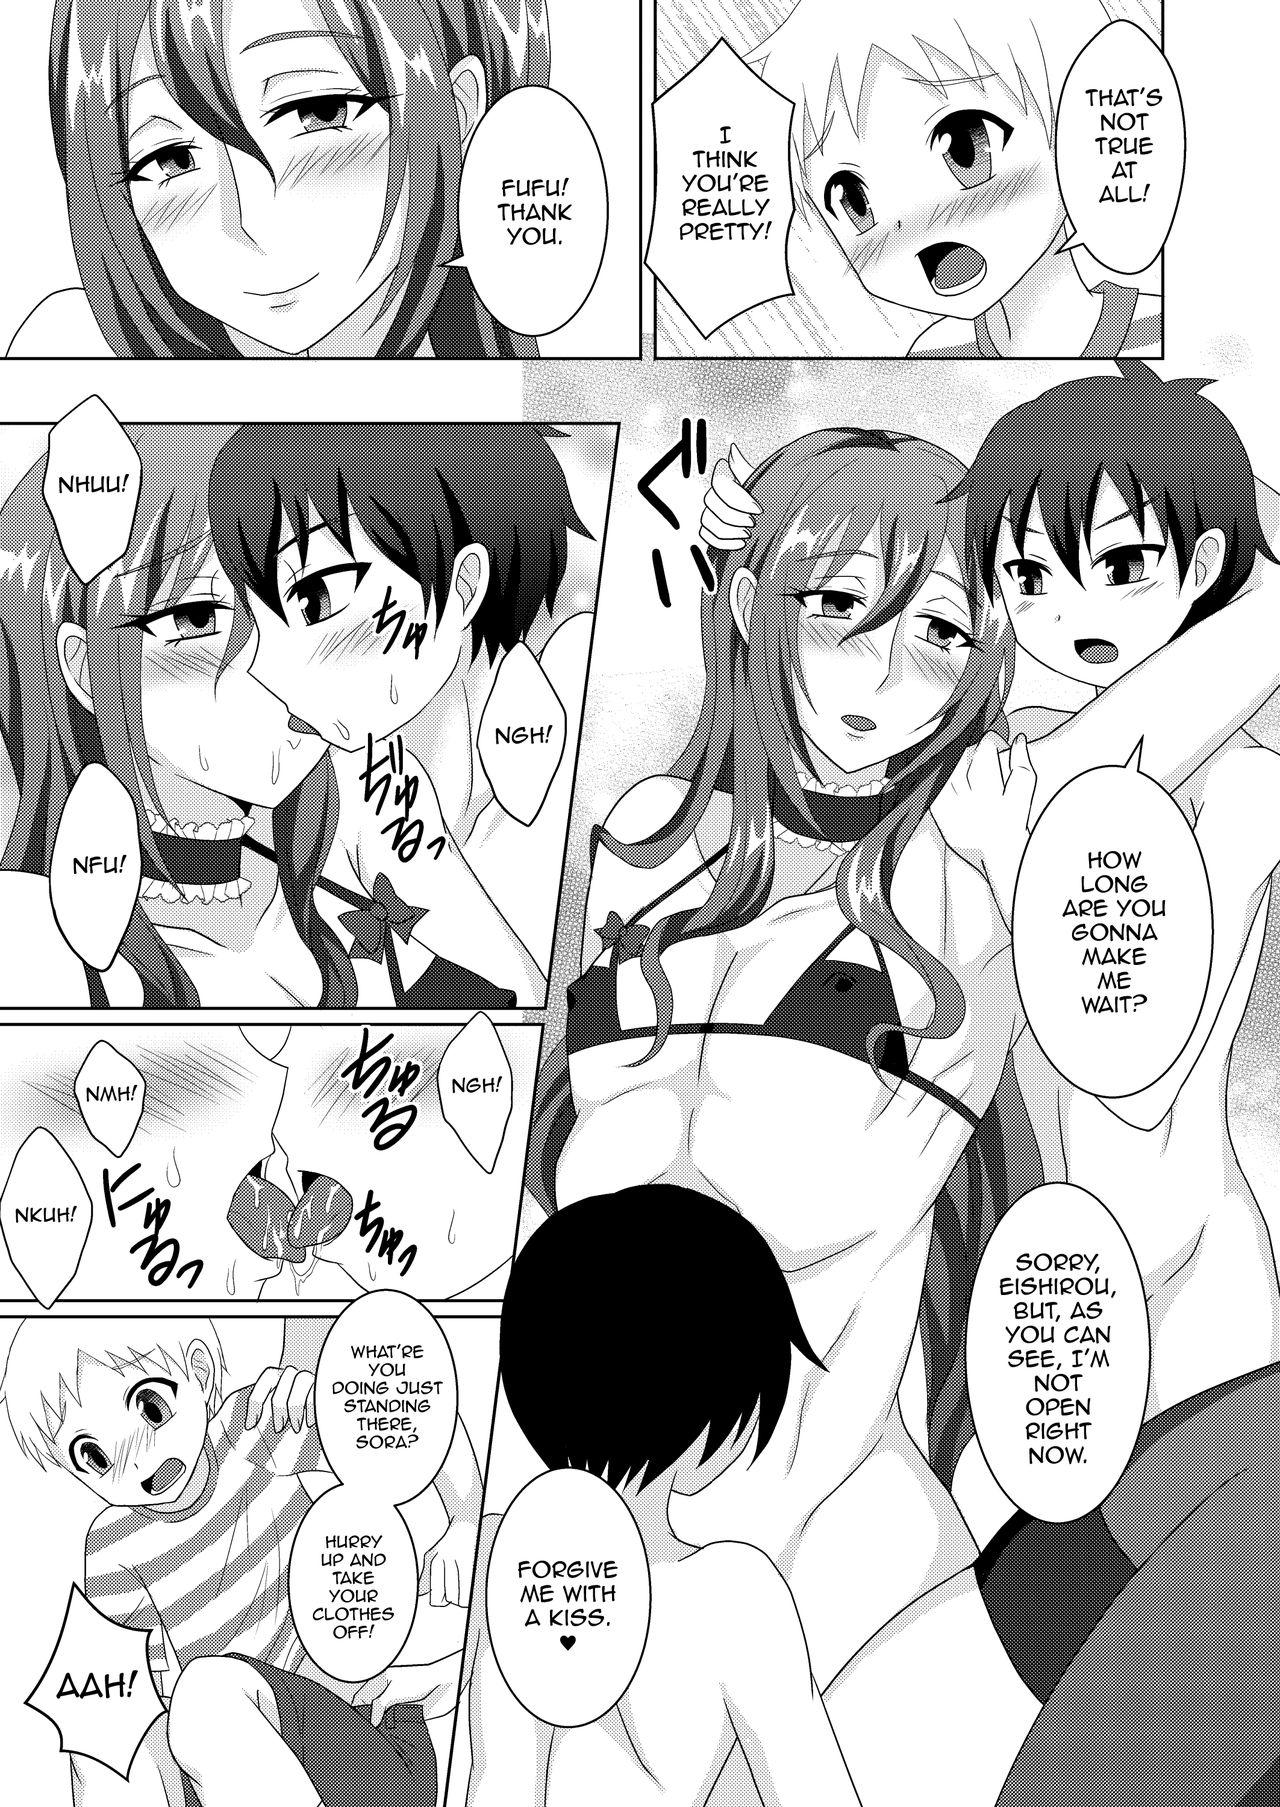 Sexy Whores Houkago Onee-chan Club - Original Free Blow Job - Page 8